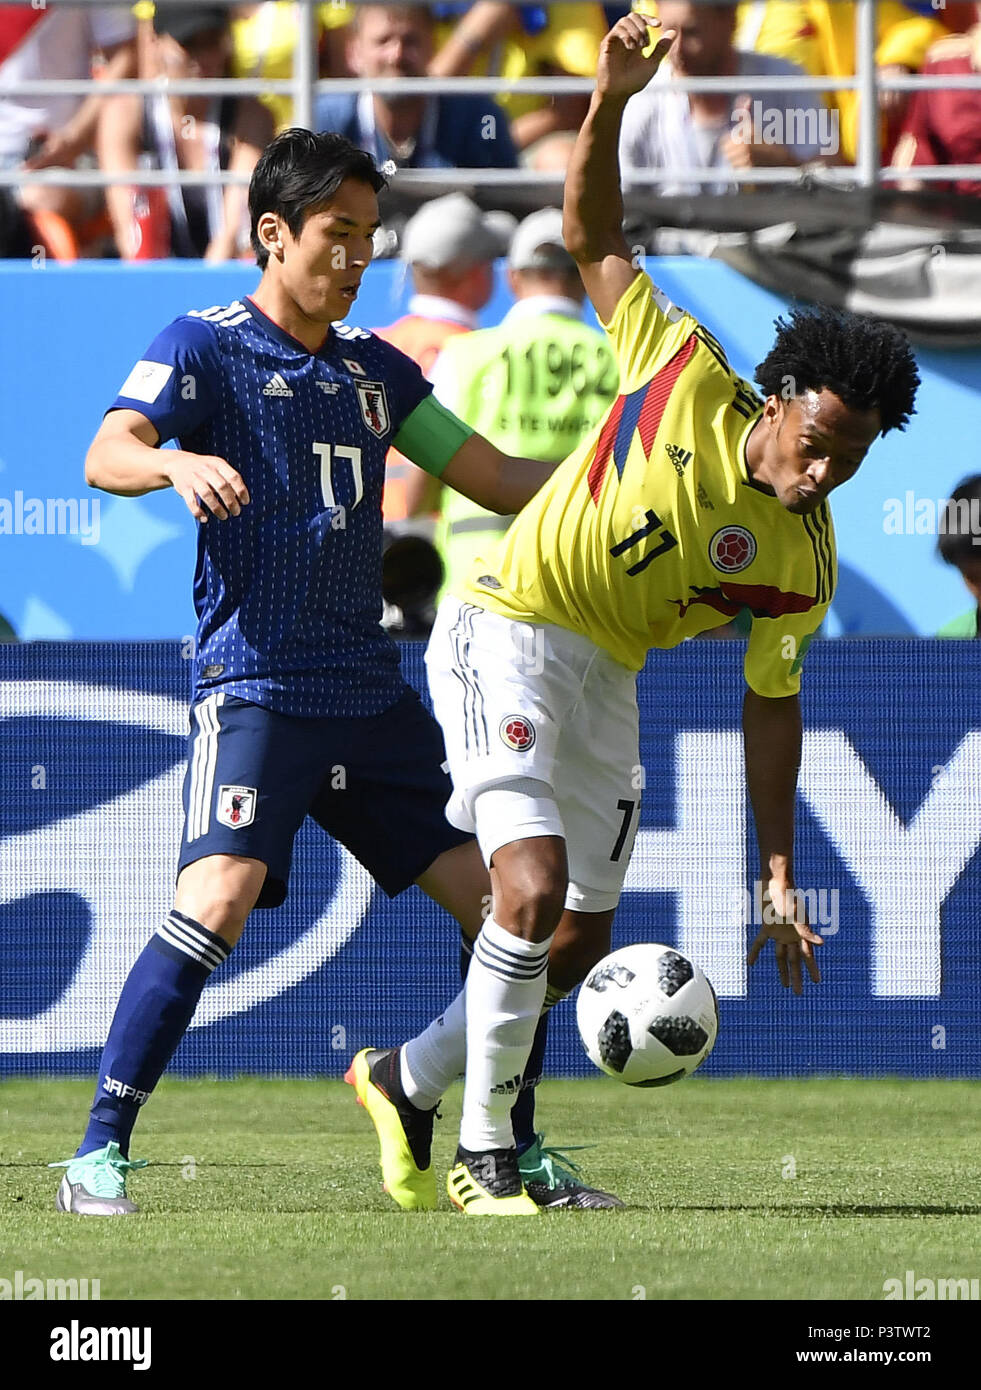 Saransk, Russia. 19th June, 2018. Makoto Hasebe (L) of Japan vies with Juan Cuadrado of Colombia during a Group H match between Colombia and Japan at the 2018 FIFA World Cup in Saransk, Russia, June 19, 2018. Credit: He Canling/Xinhua/Alamy Live News Stock Photo